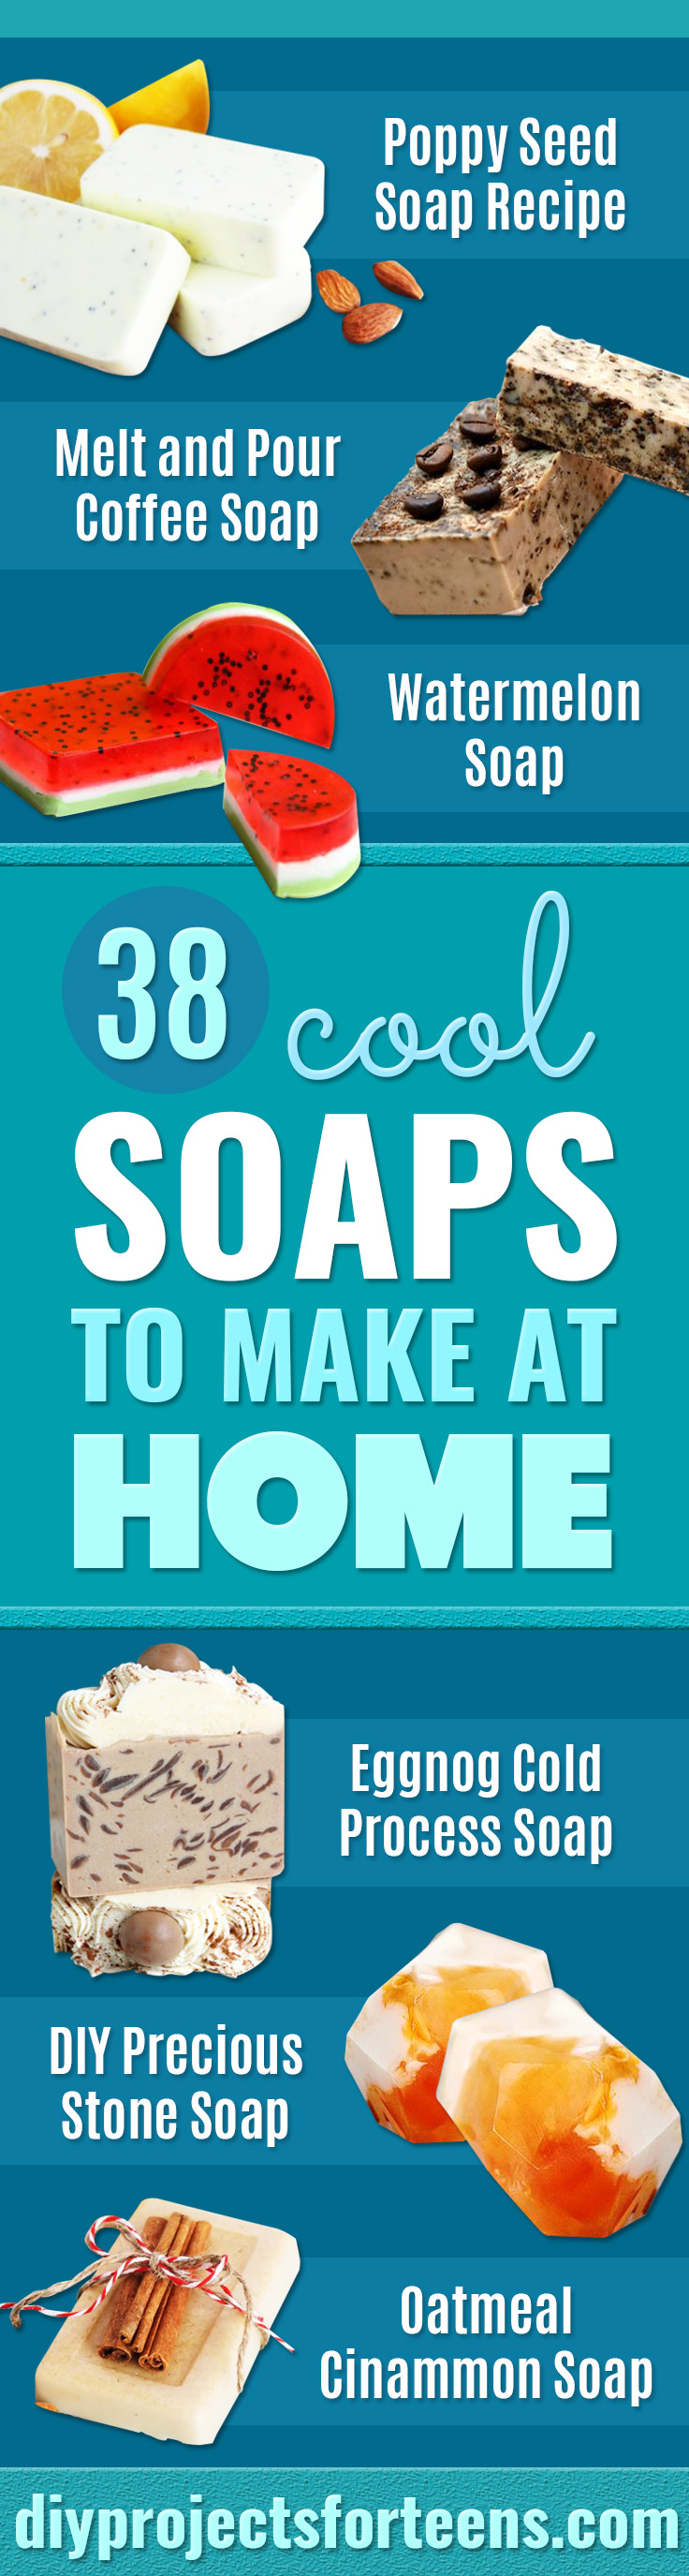 Cool Soaps To Make At Home - Grapefruit Mint Poppyseed Bars - DIY Soap Recipes and Ideas - Best Soap Tutorials for Soap Making Without Lye - Easy Cold Process Melt and Pour Tips for Beginners - Crockpot, Essential Oils, Homemade Natural Soaps and Products - Creative Crafts and DIY for Teens, Kids and Adults #soapmaking #diygifts #soap #soaprecipes